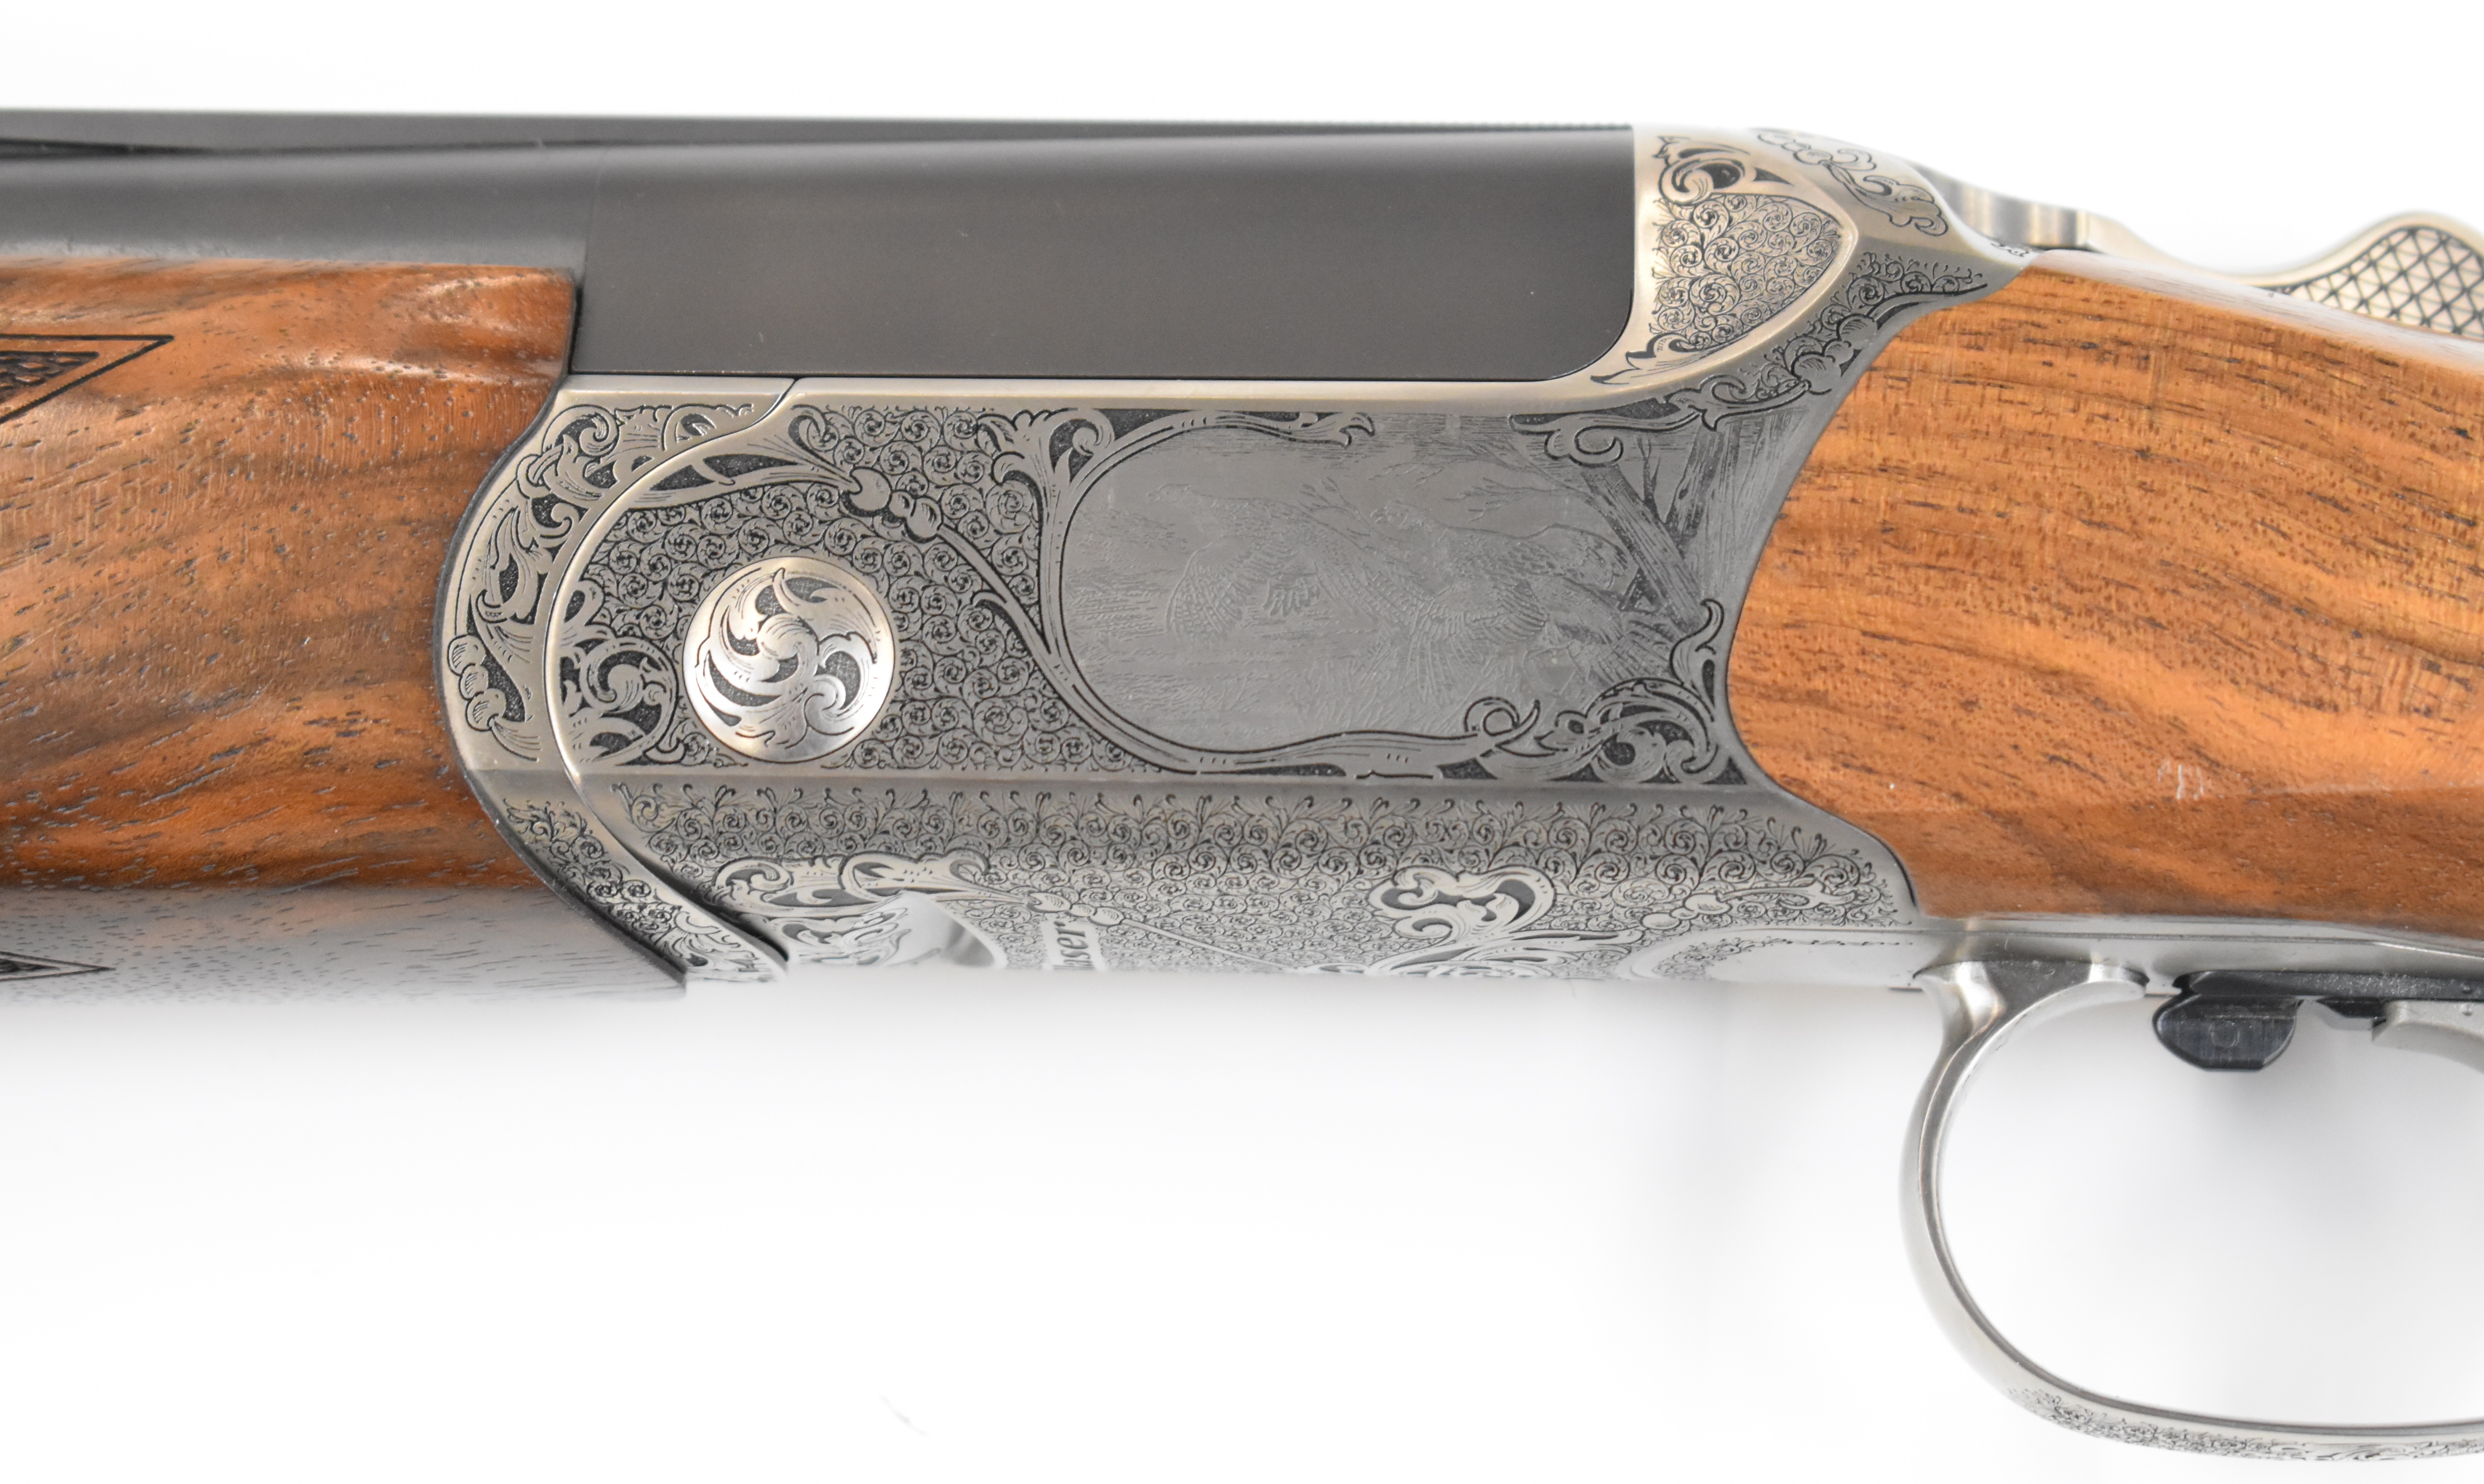 Blaser F16 Grand Luxe 12 bore over under ejector shotgun with Bonsi Brothers engraved locks, - Image 12 of 14